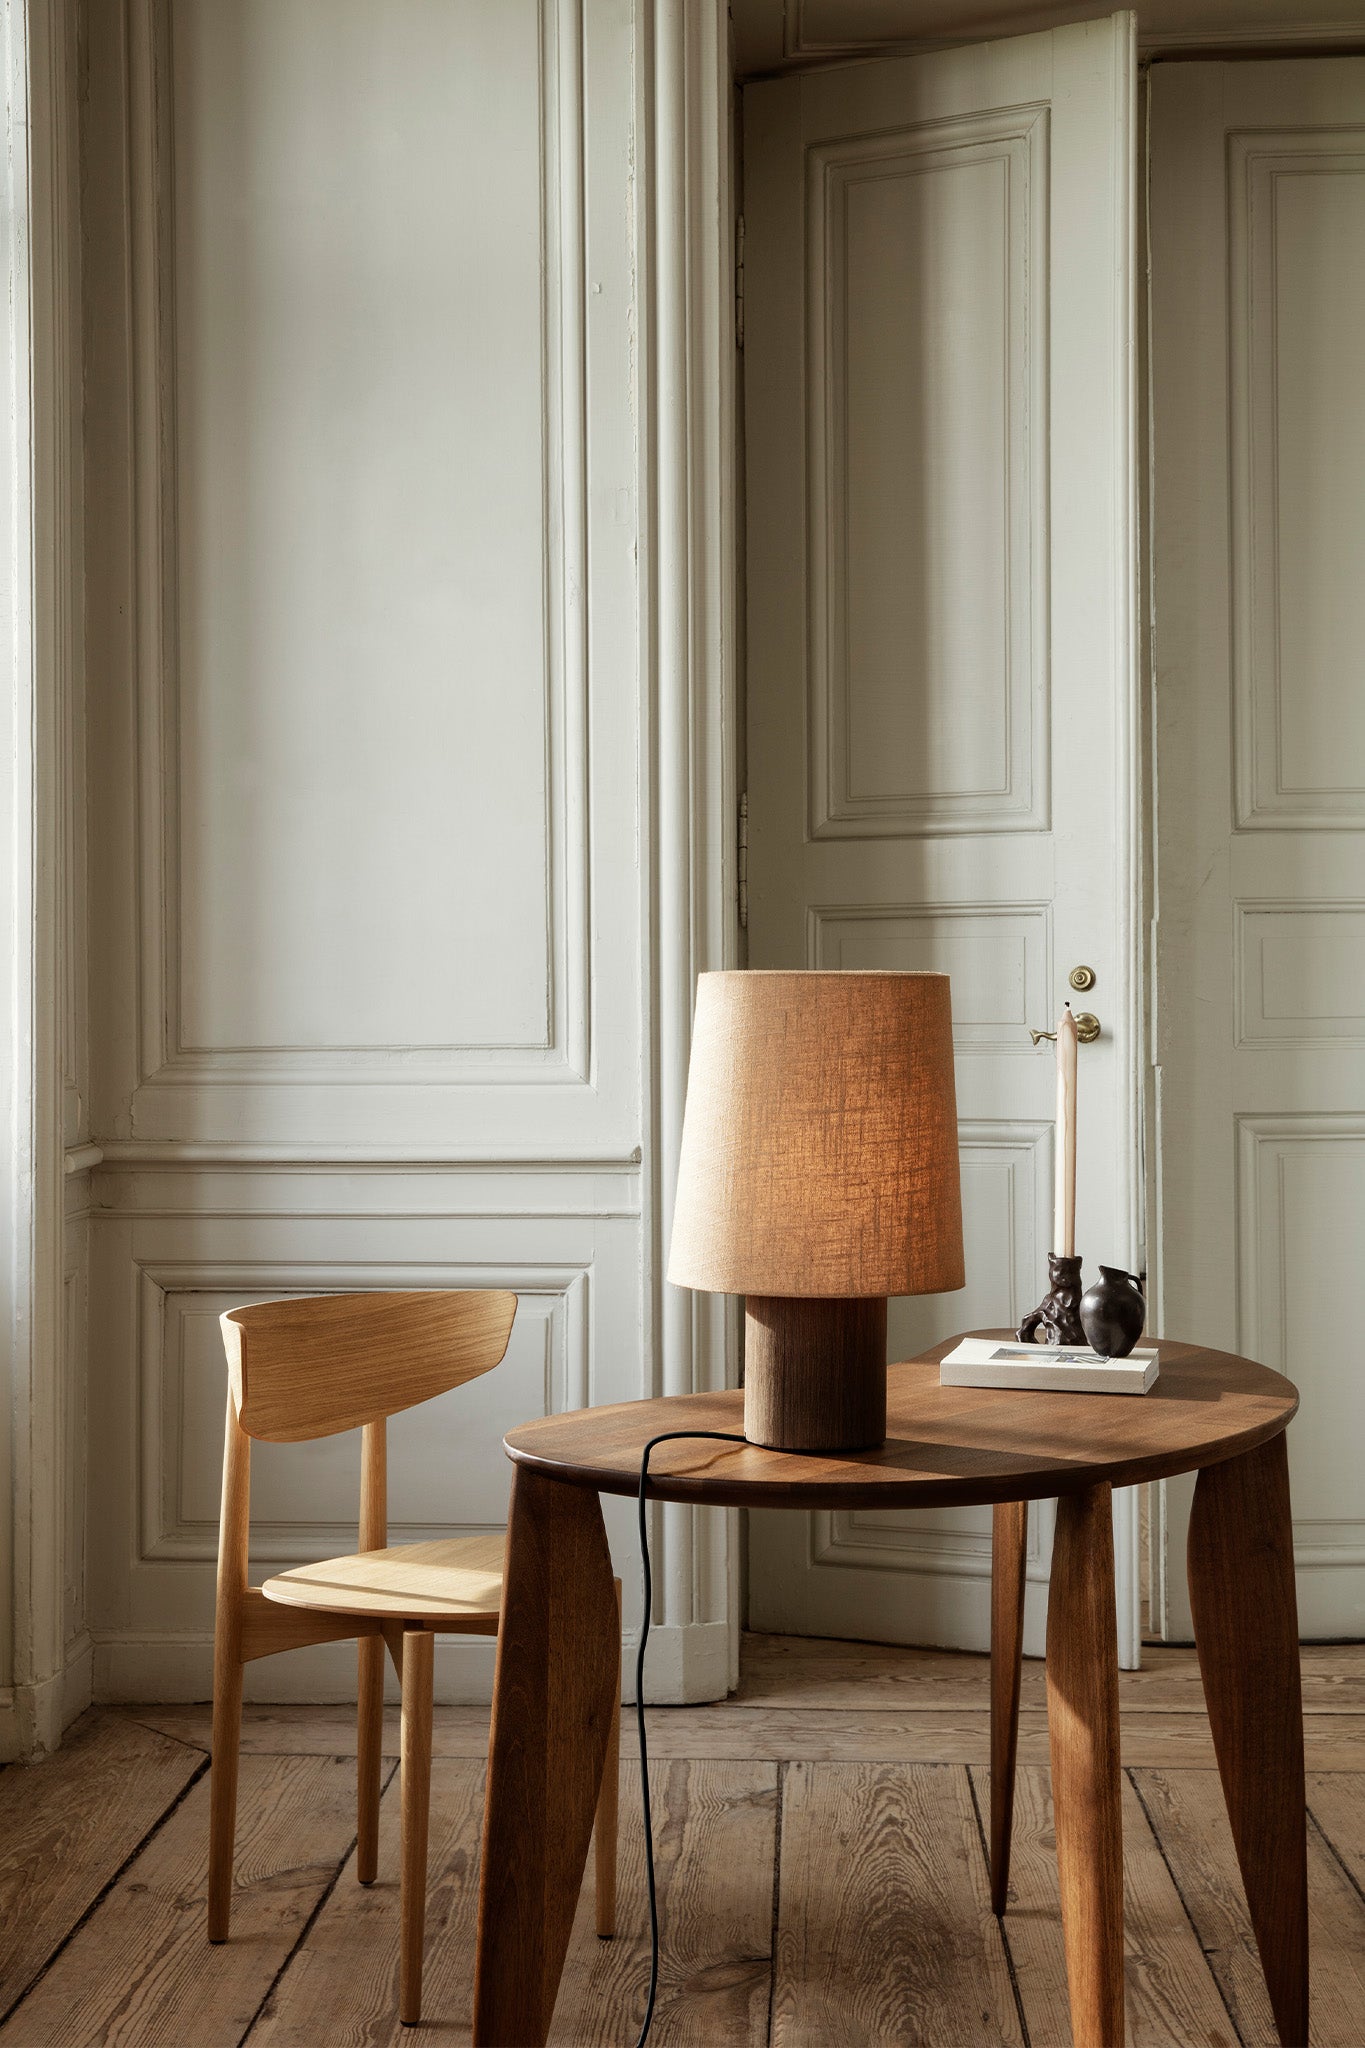 Herman Dining Chair Wood in Natural Oak. Image by Ferm Living